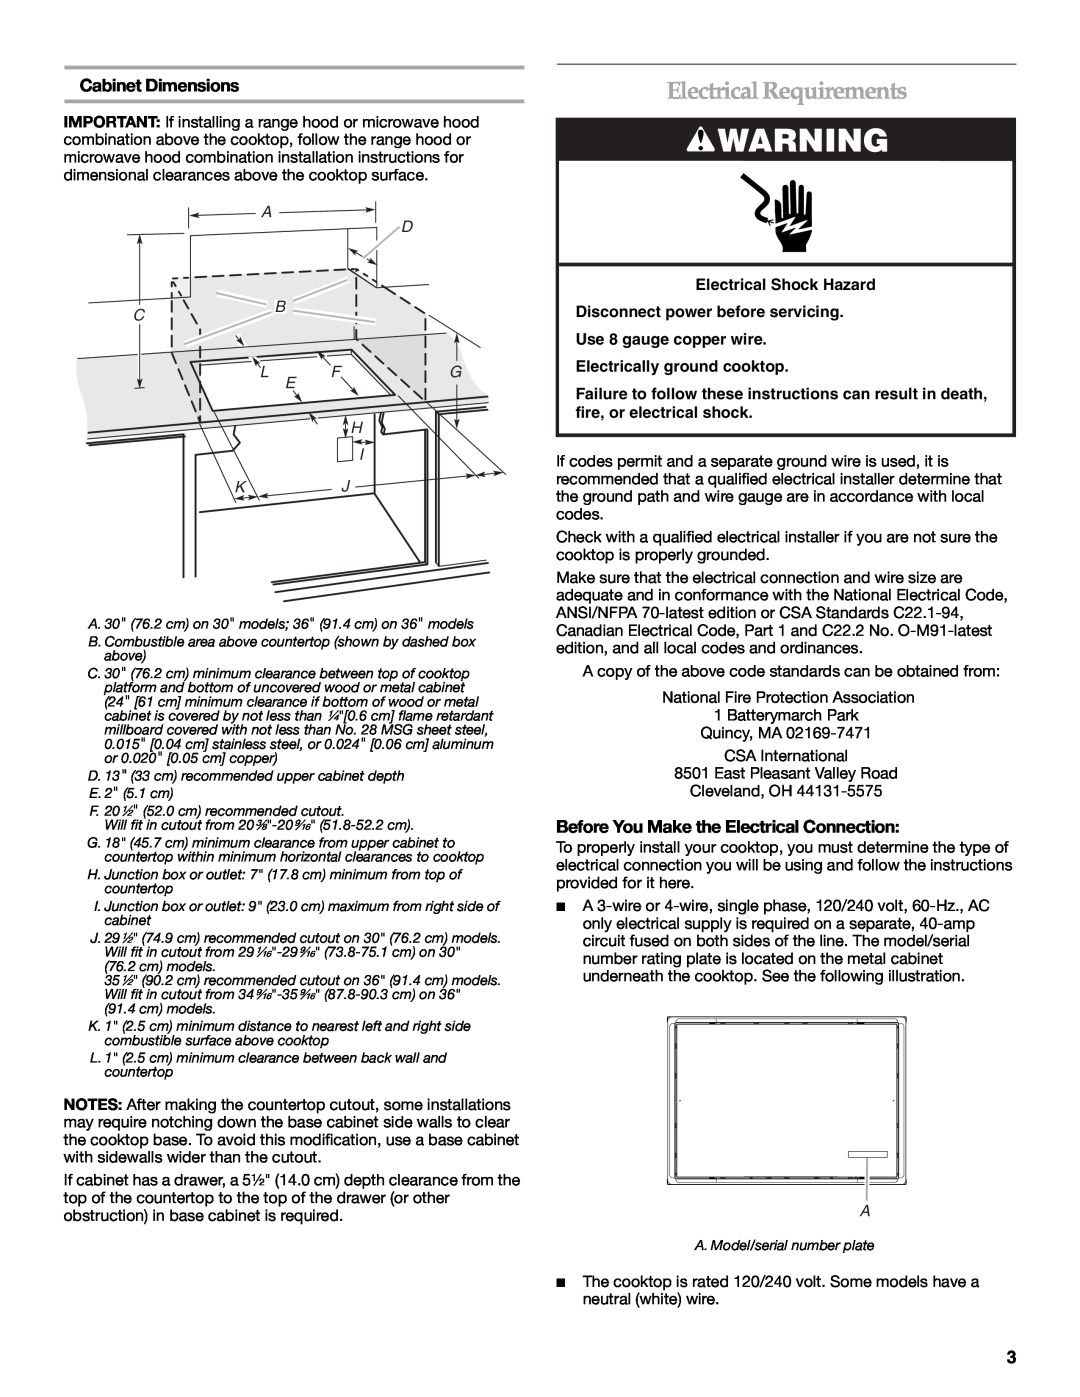 Whirlpool W10353374A Electrical Requirements, Cabinet Dimensions, Before You Make the Electrical Connection 